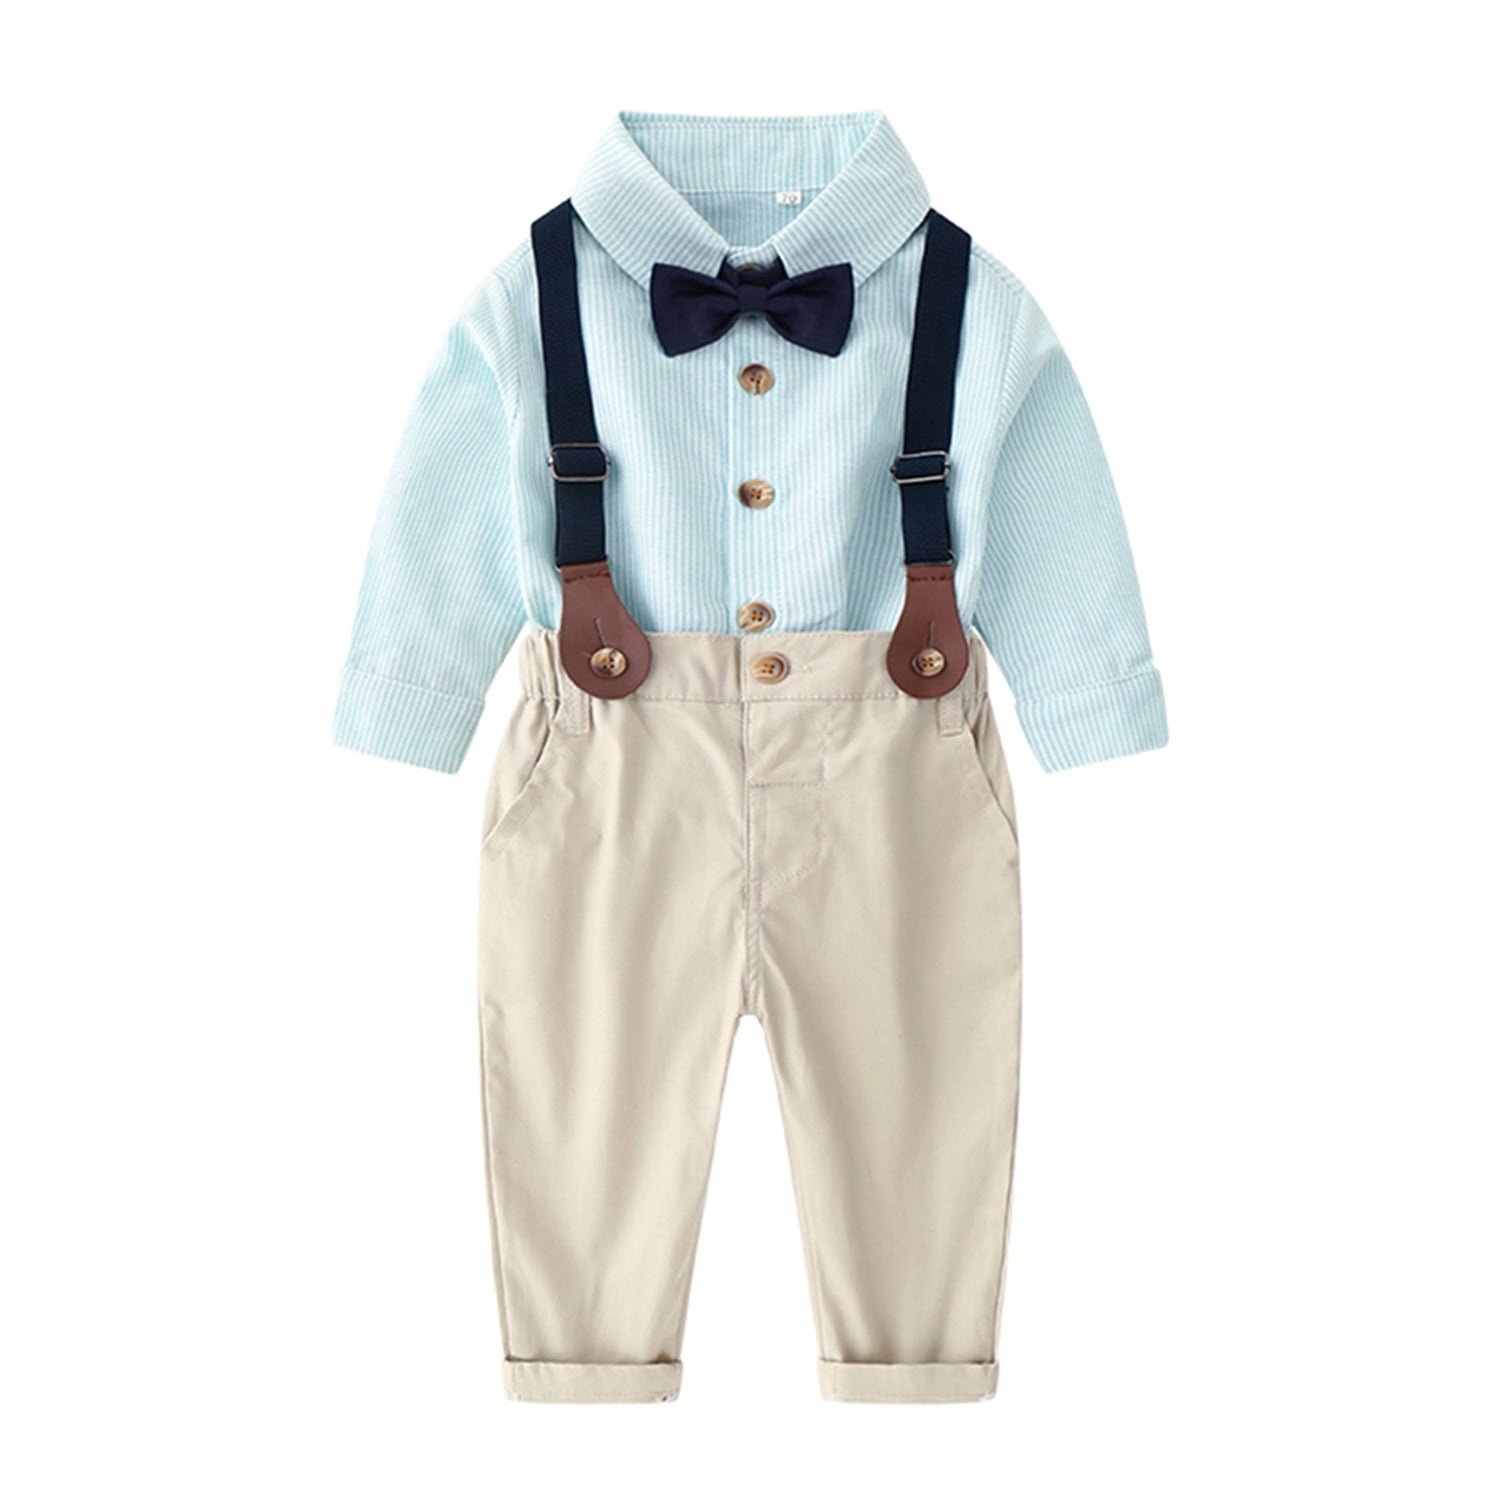 Boys 2Pcs Shirt Shorts Christening Suits Lapel Gentleman Outfits 0-8 Years 